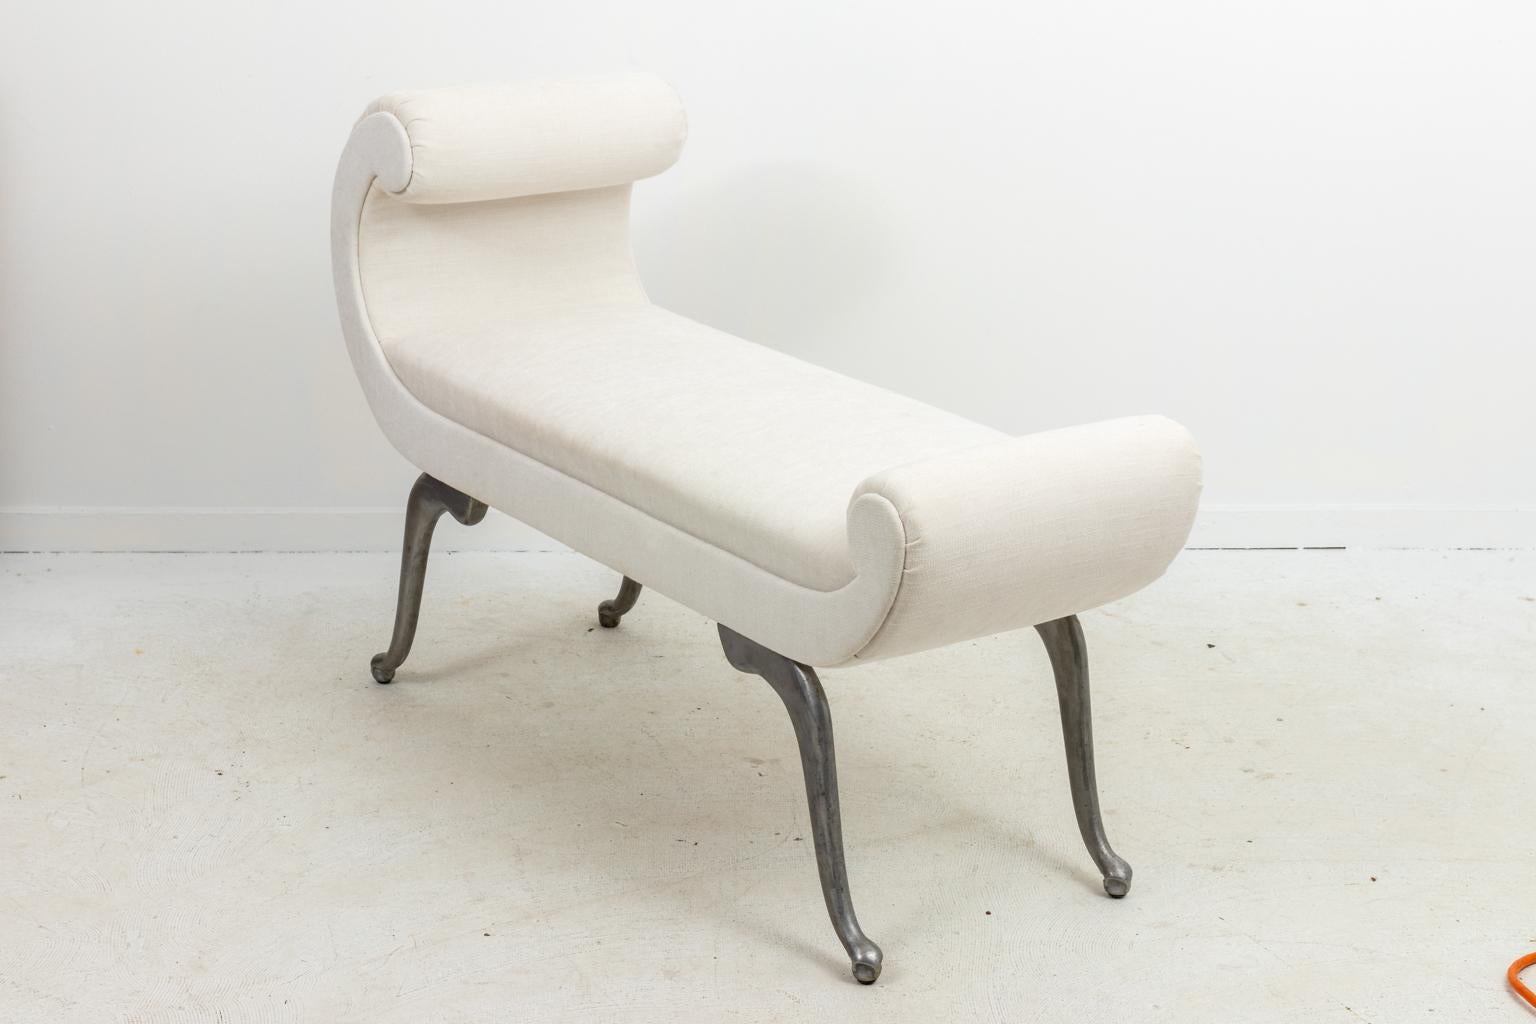 Vintage modern bench, freshly upholstered in fabric with C-scroll back and aluminum legs, circa 1950s. Made in the United States.